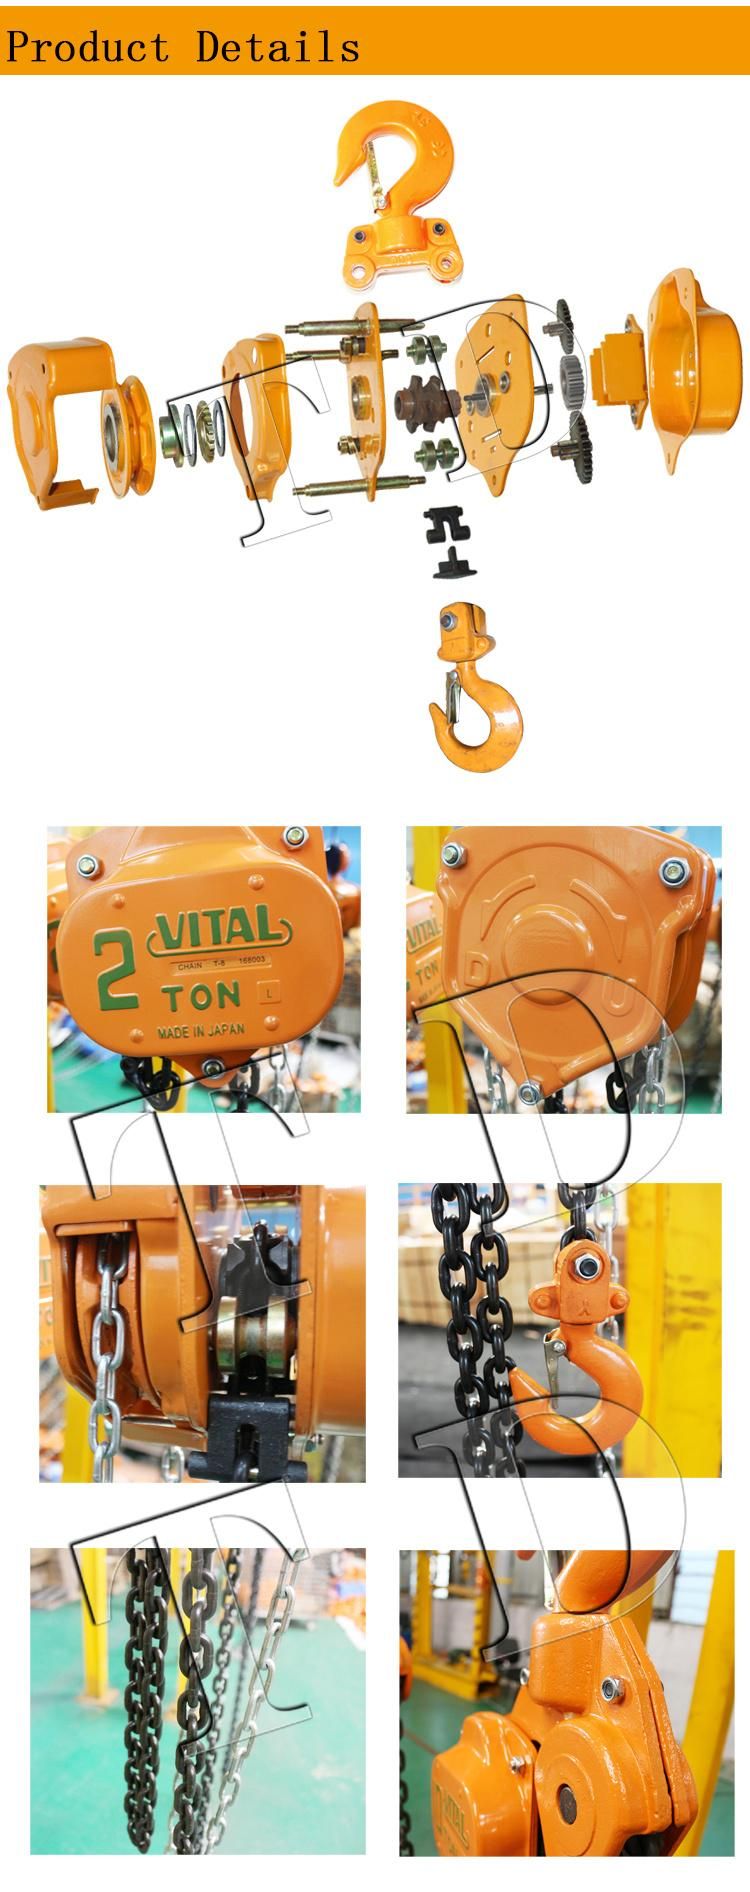 High Quality Vital Type Chain Block with G80 Chain 1ton 2ton 3ton Best Selling